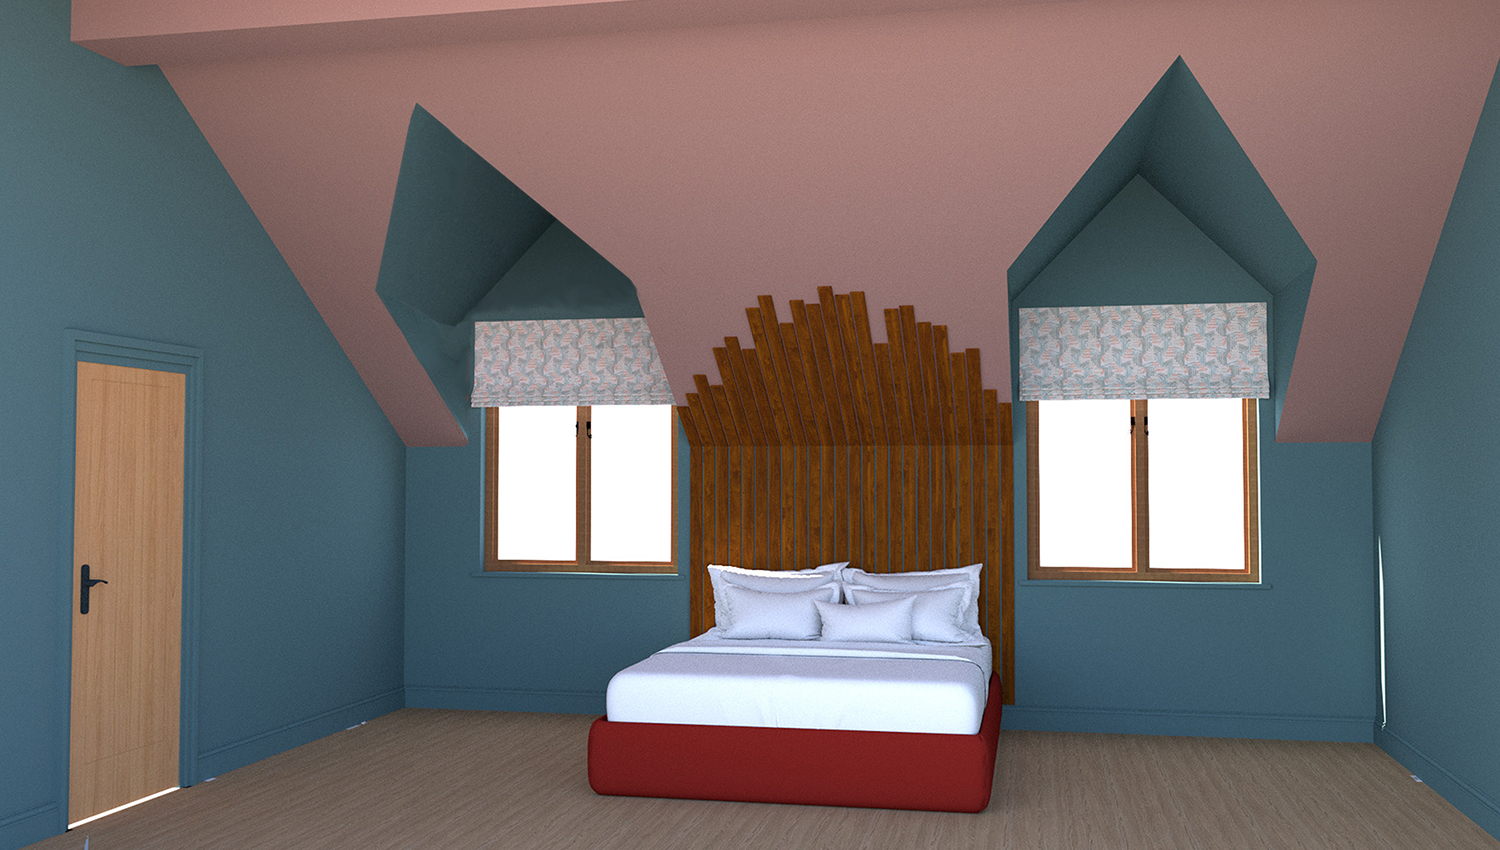 A computer generated image showing the headboard design in the bedroom.